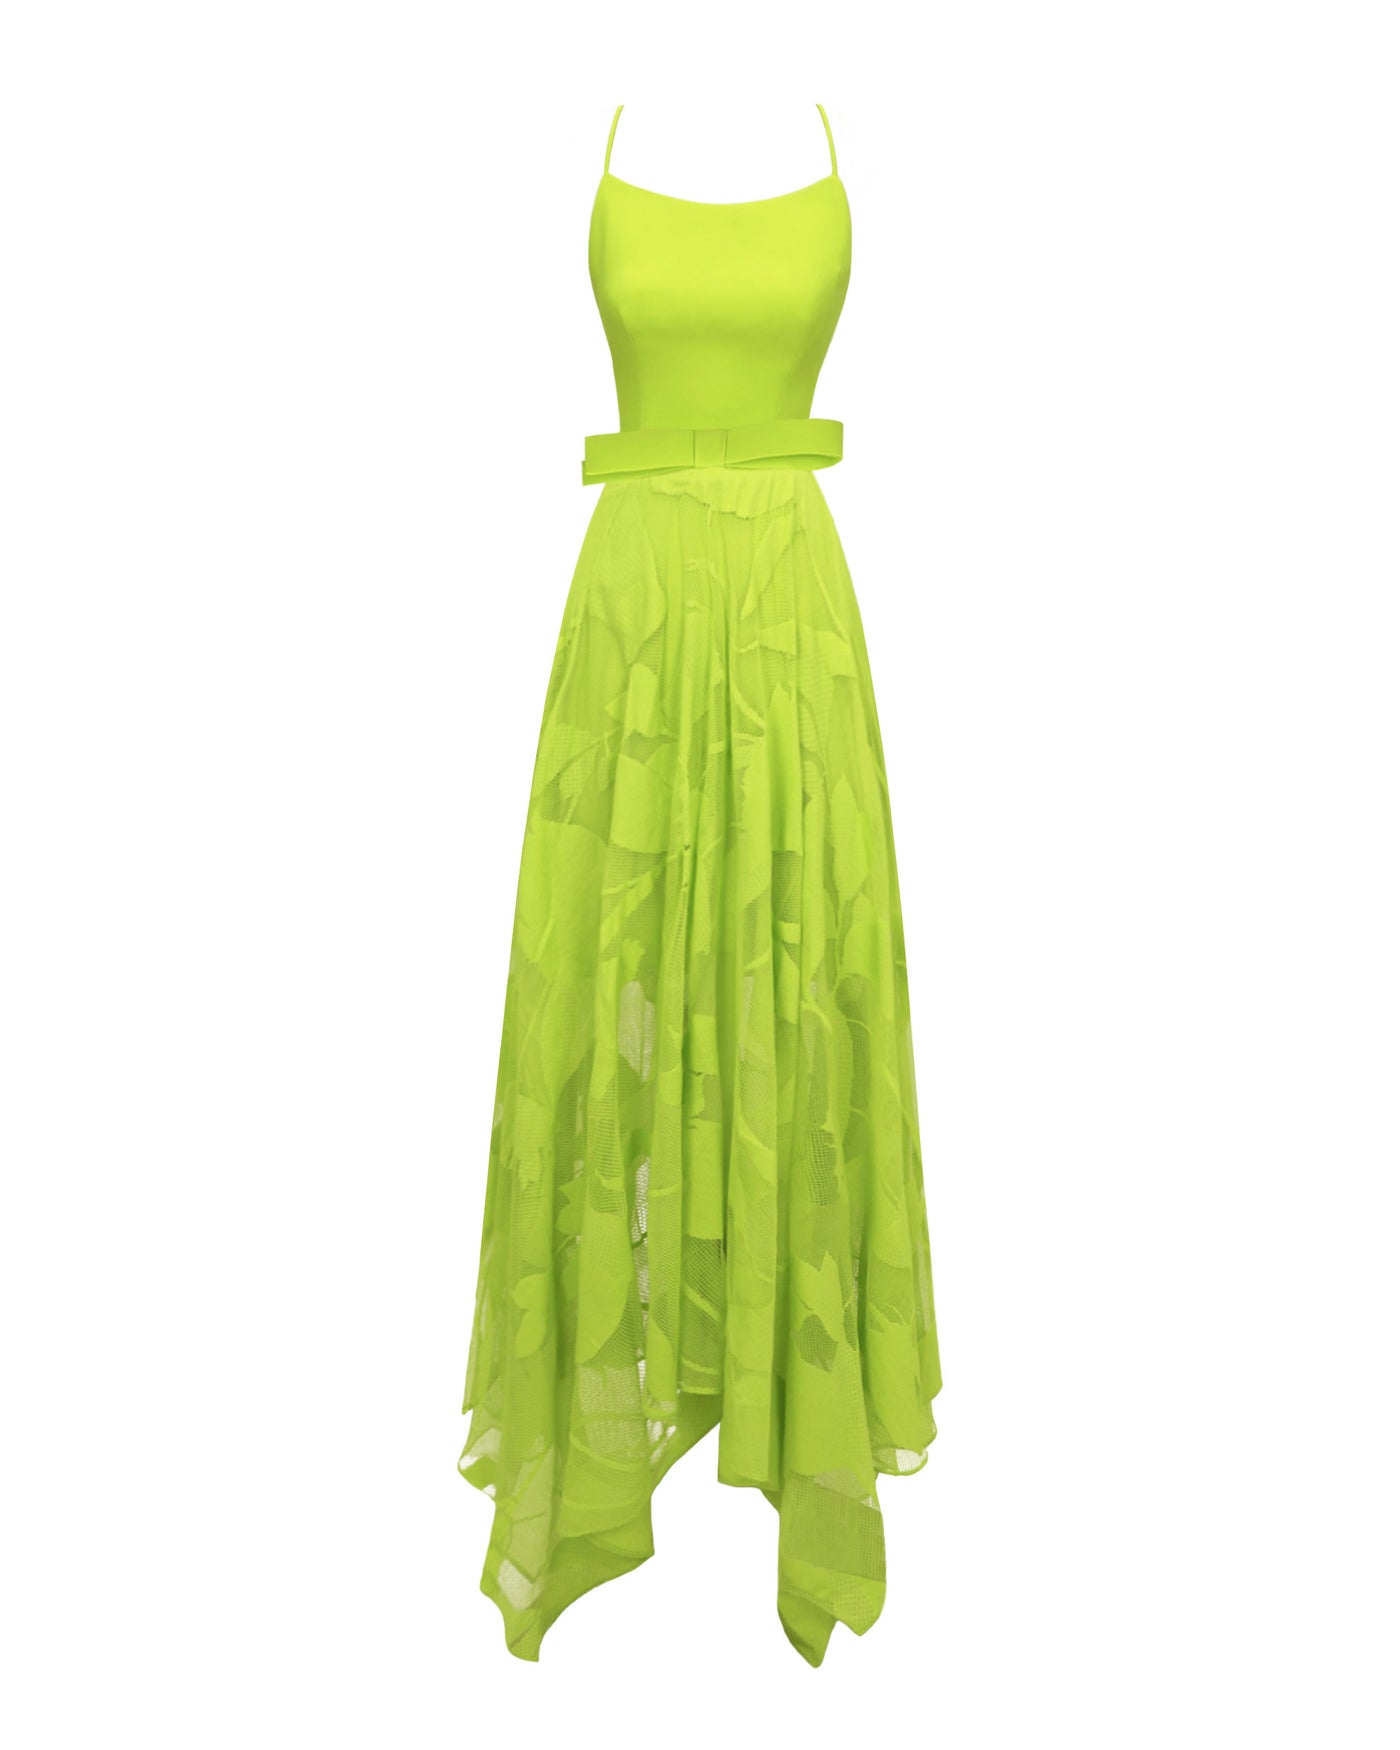 An evening wear set featuring a patterned lace midi skirt with asymmetrical hemline, and a crepe top with a sharp bow design, all in lime color.